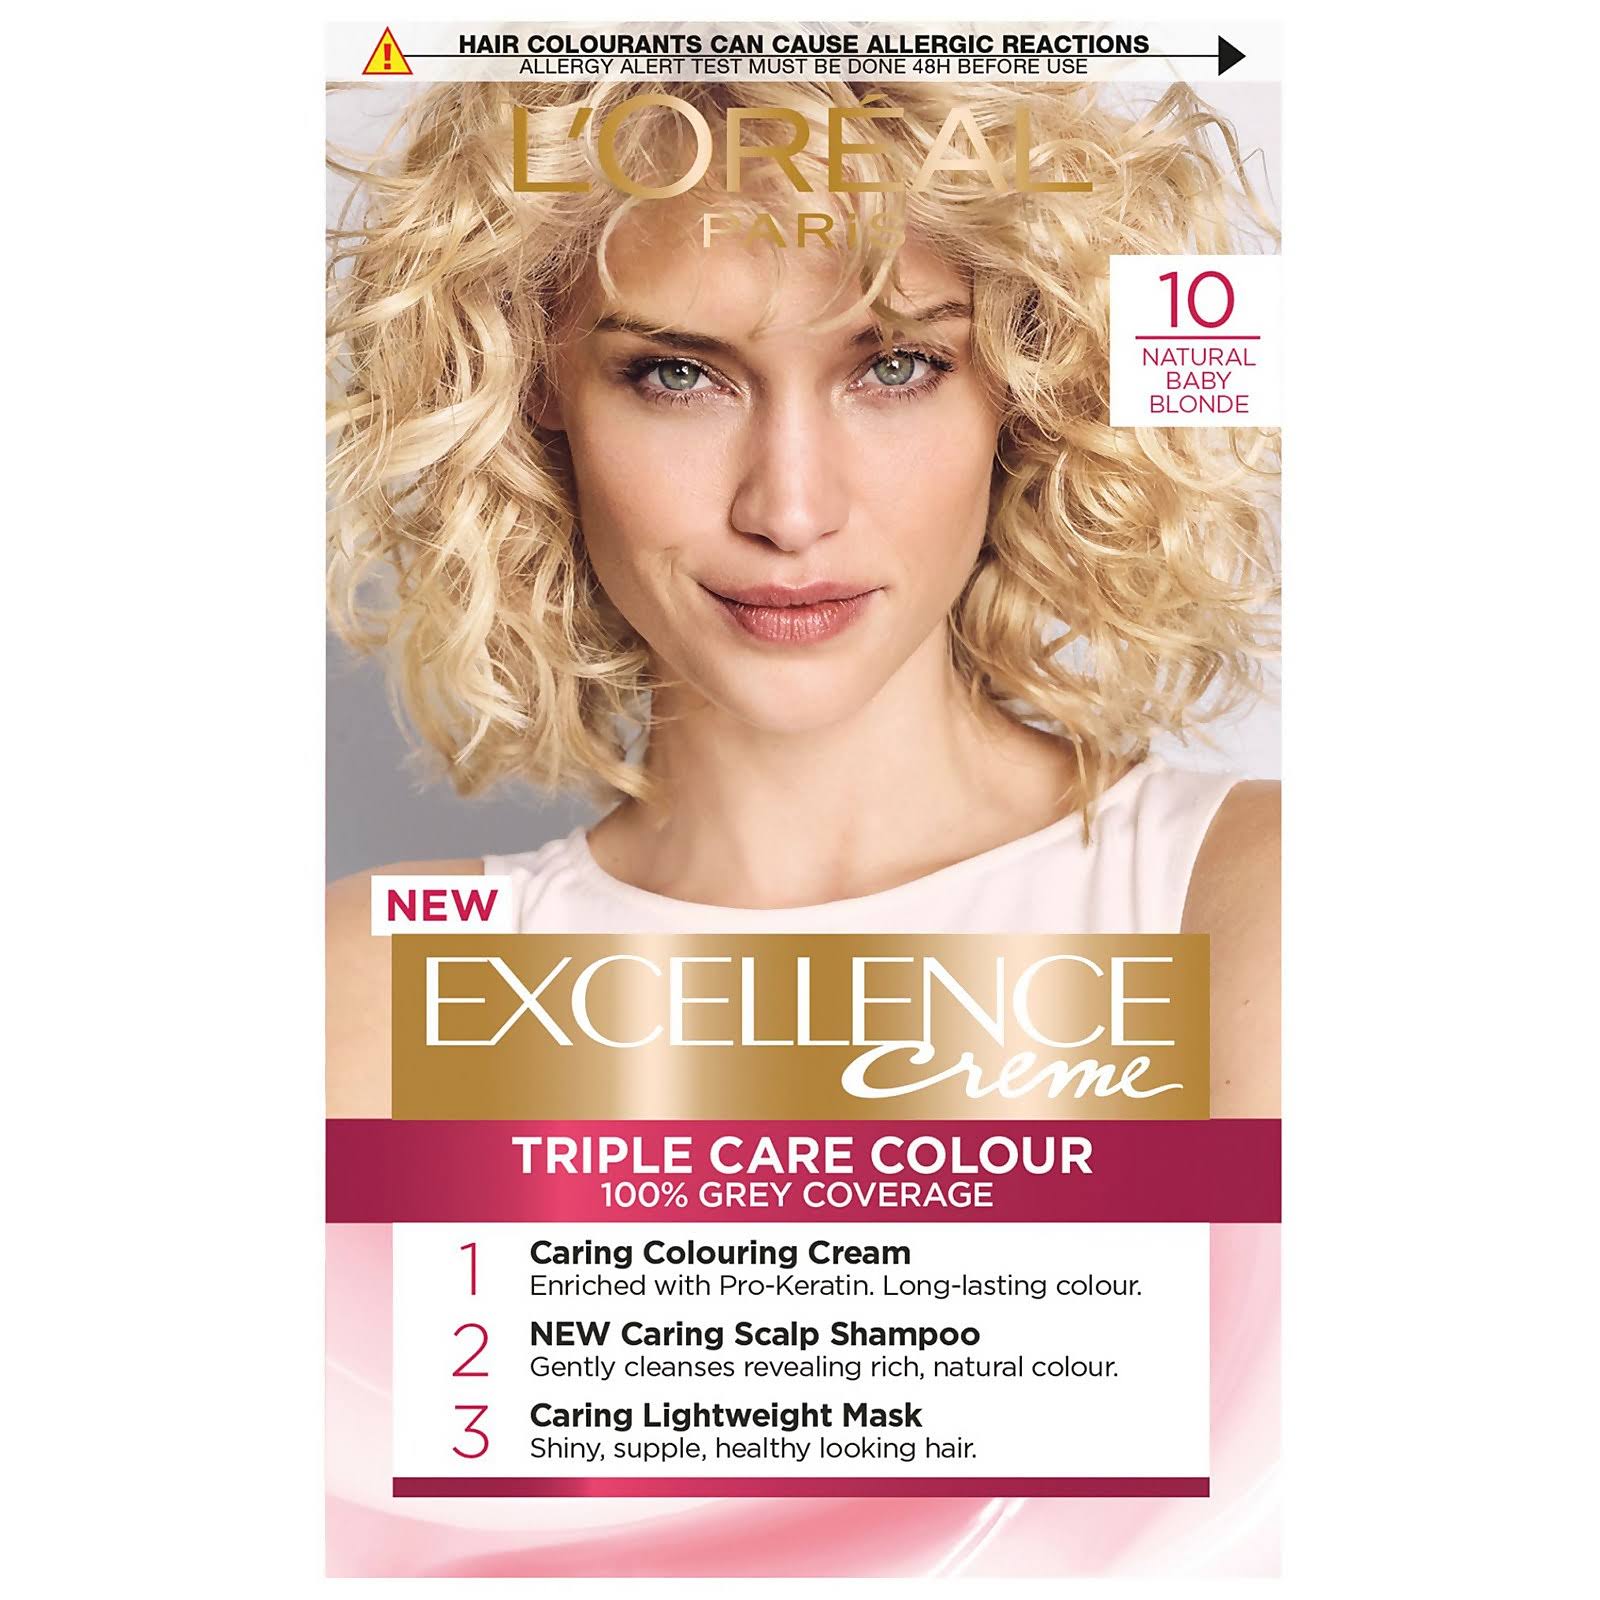 L'Oreal Excellence Permanent Hair Dye - 10 Natural Baby Blonde